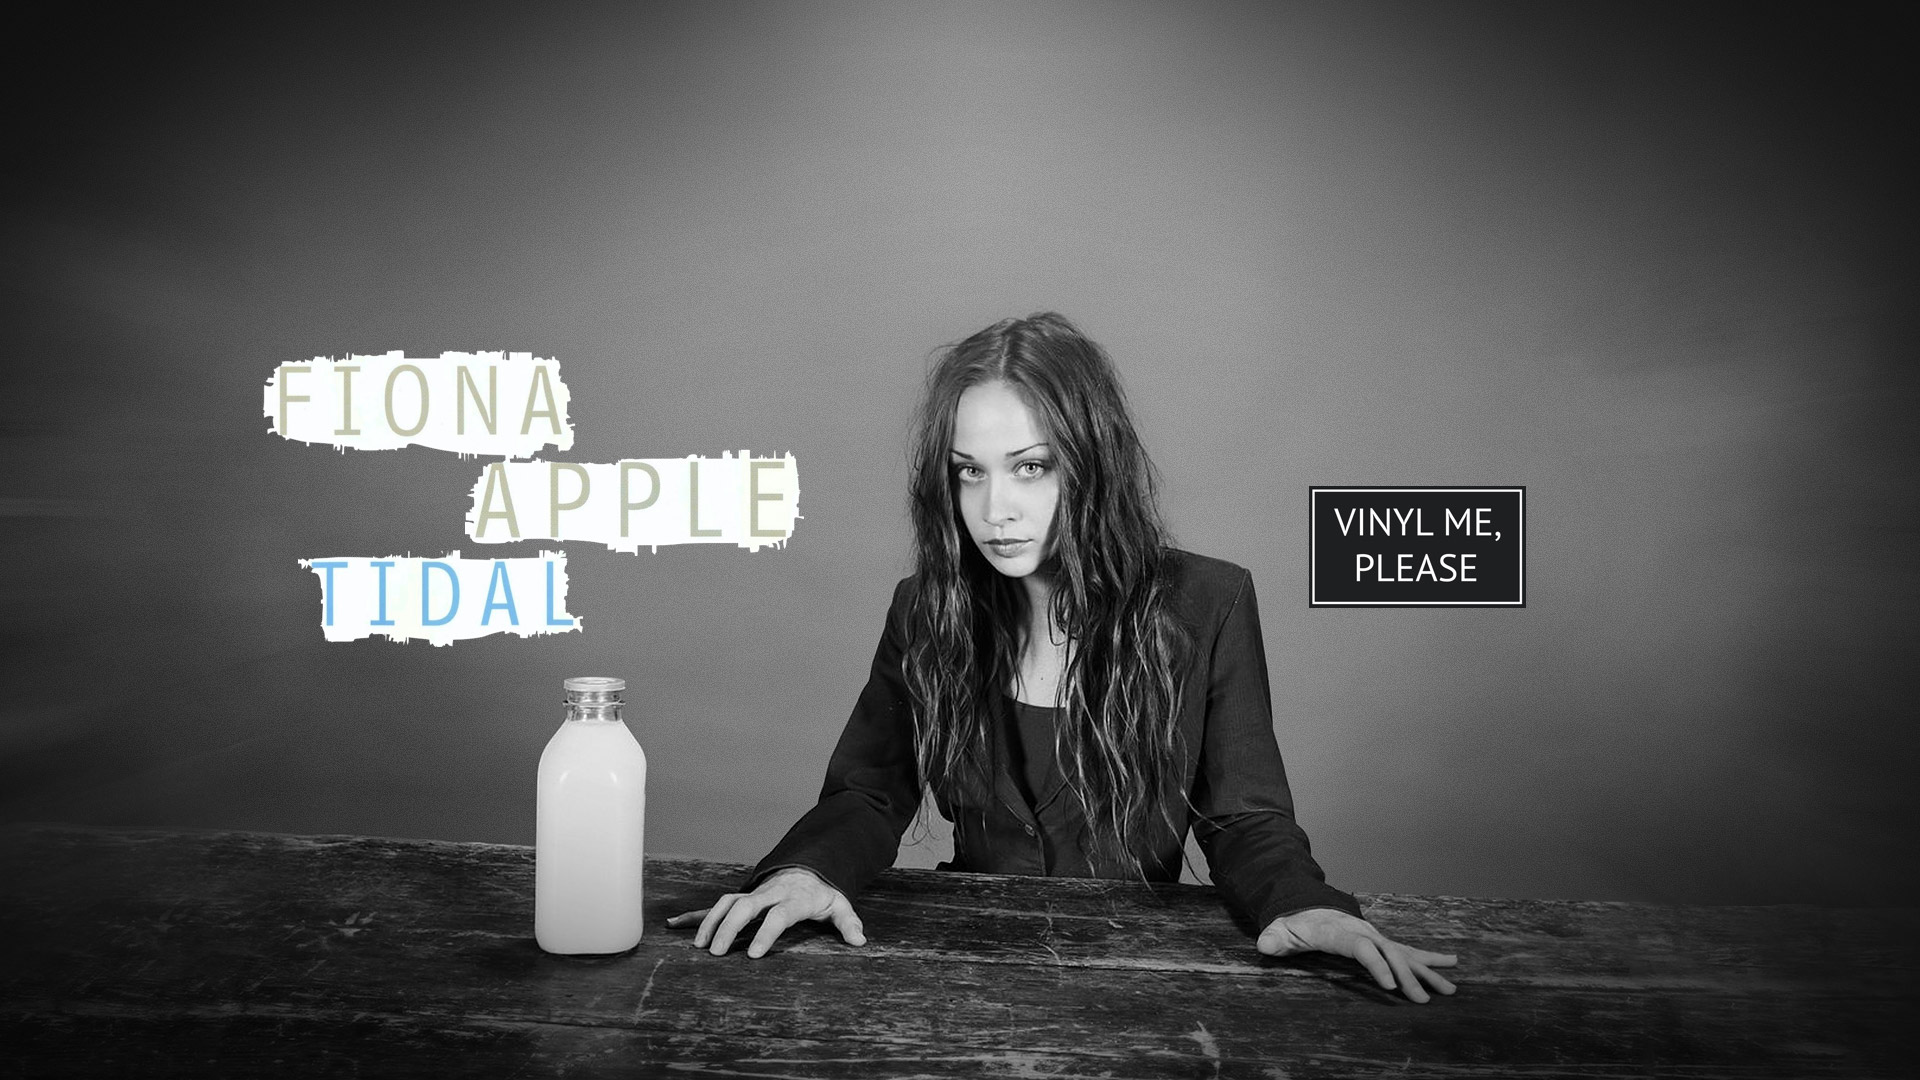 Geek insider, geekinsider, geekinsider. Com,, vinyl me, please may edition: fiona apple 'tidal', entertainment